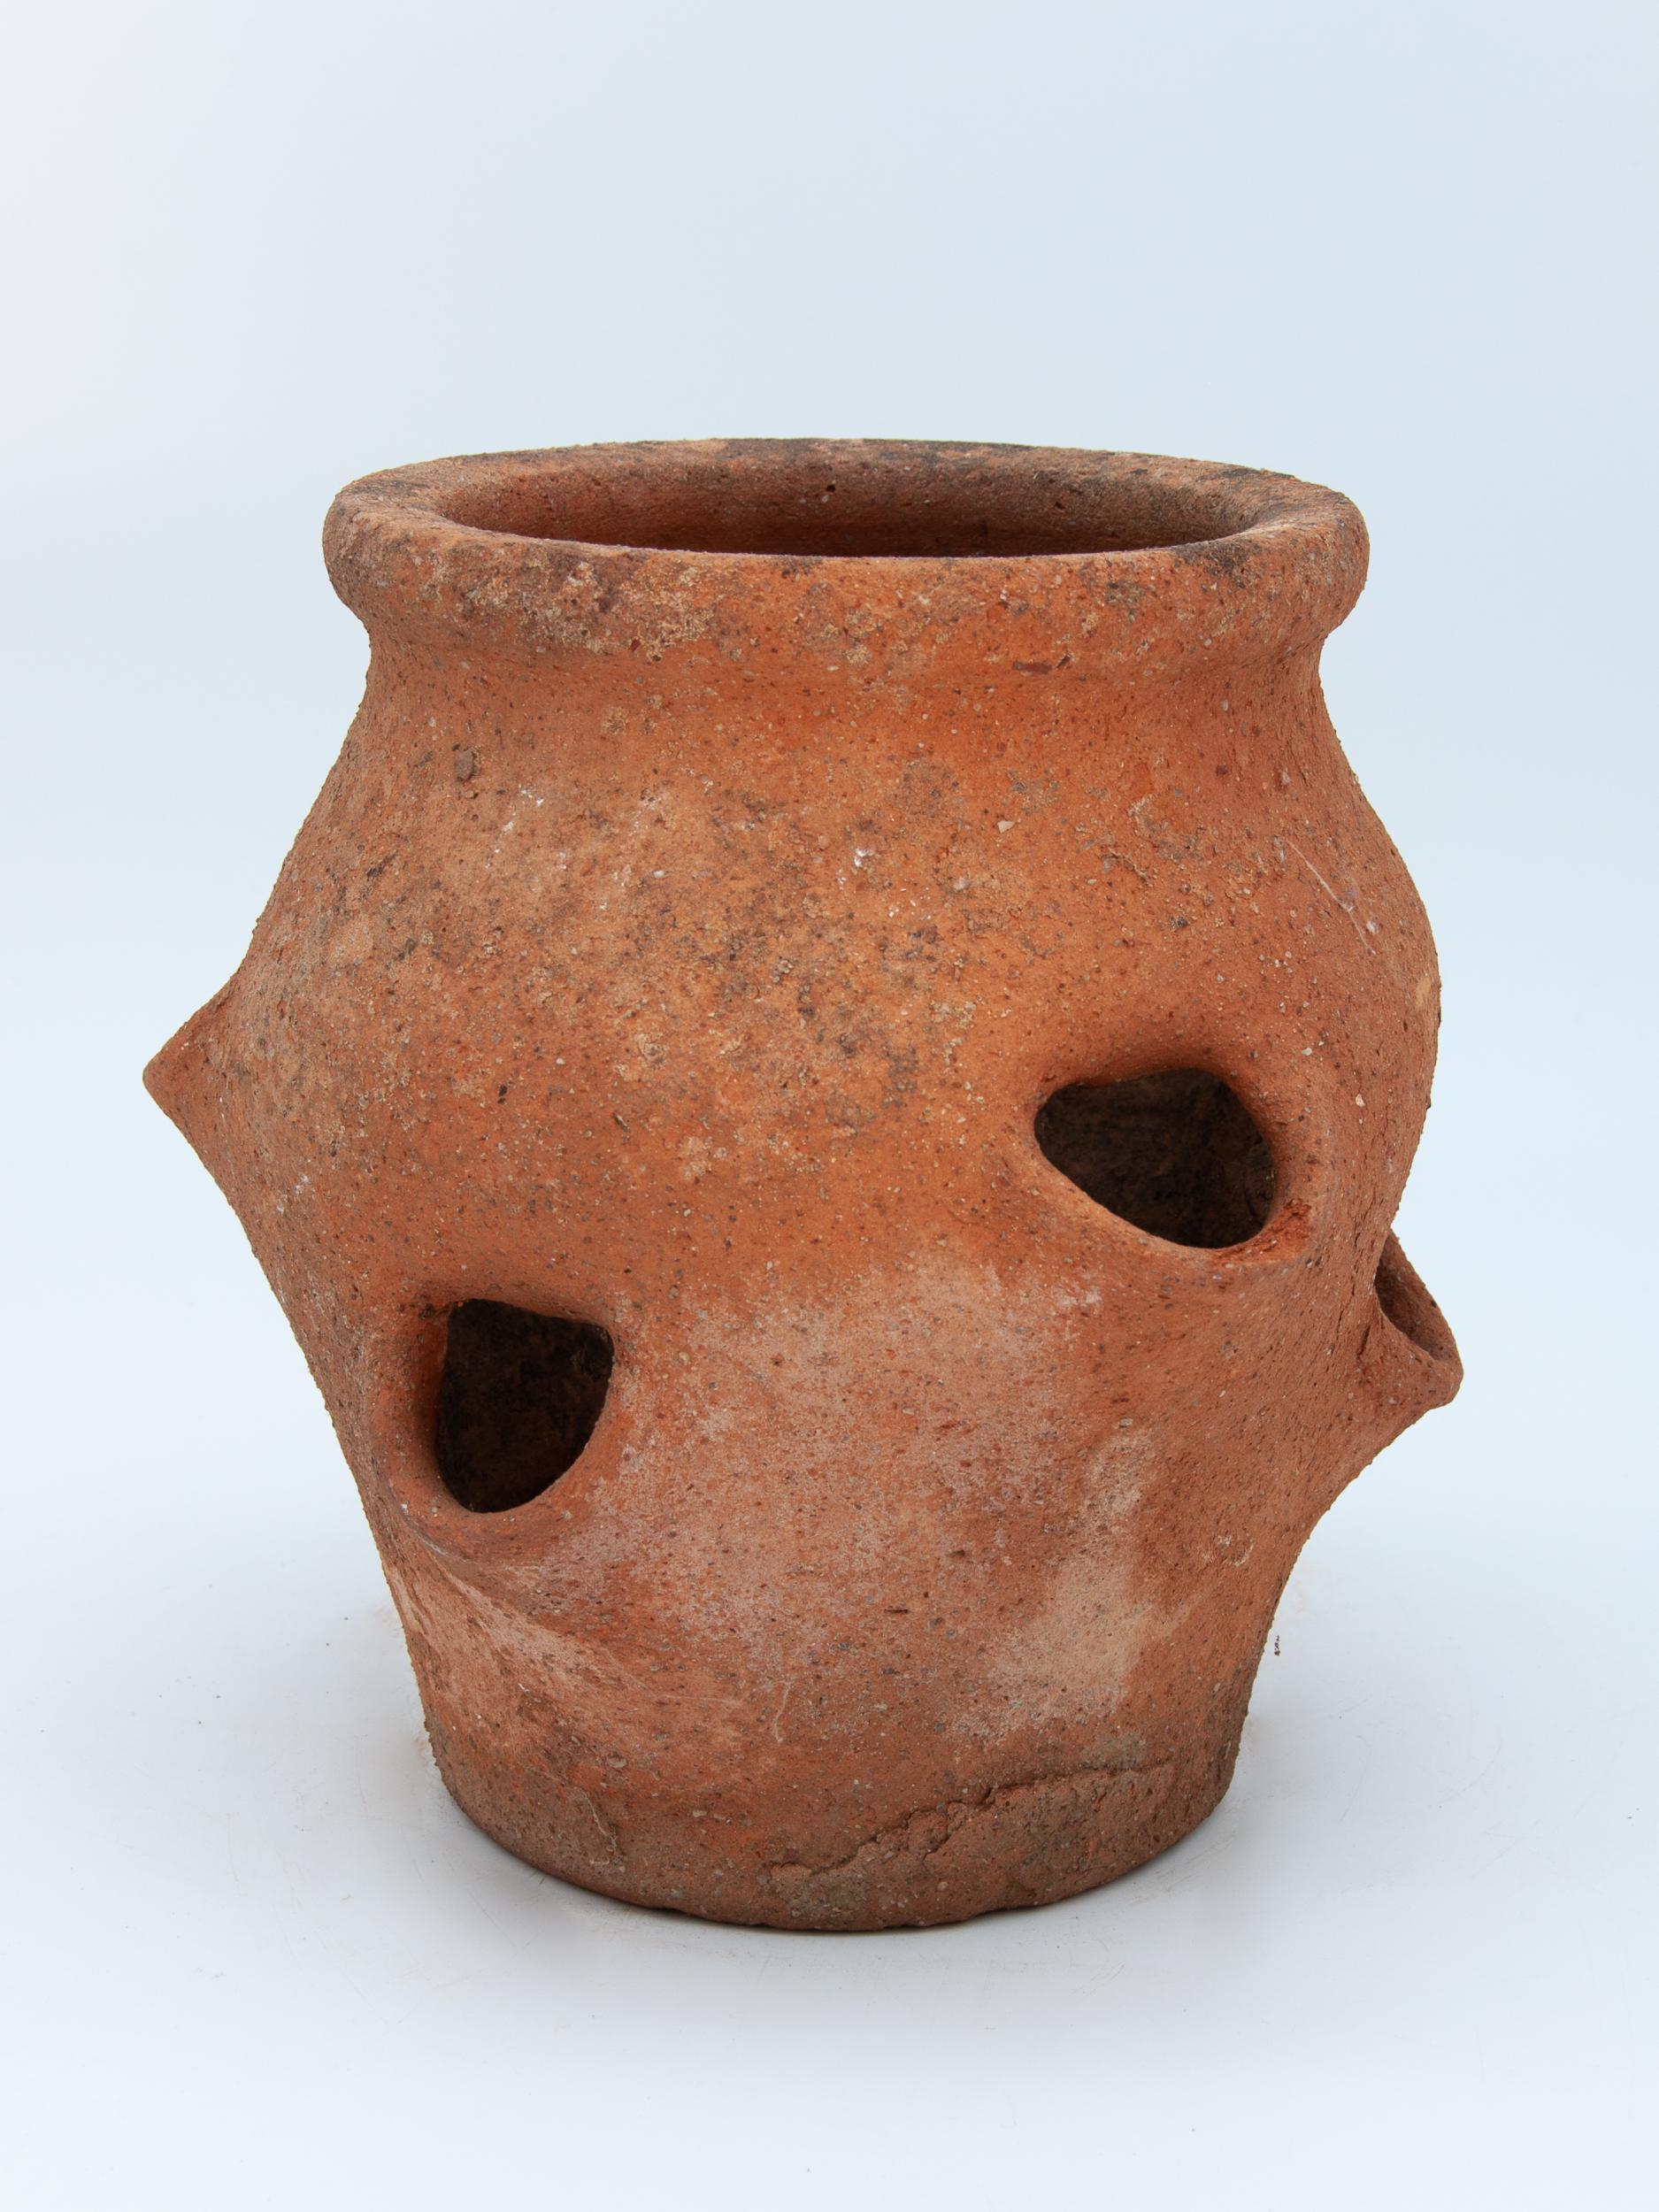 The shape and style of these pots have been perfected to grow Strawberries in. This Strawberry pot made from terracotta features deep side planting holes at various heights and has the classic urn shape with a wide mouth. Early 20th century. Wear